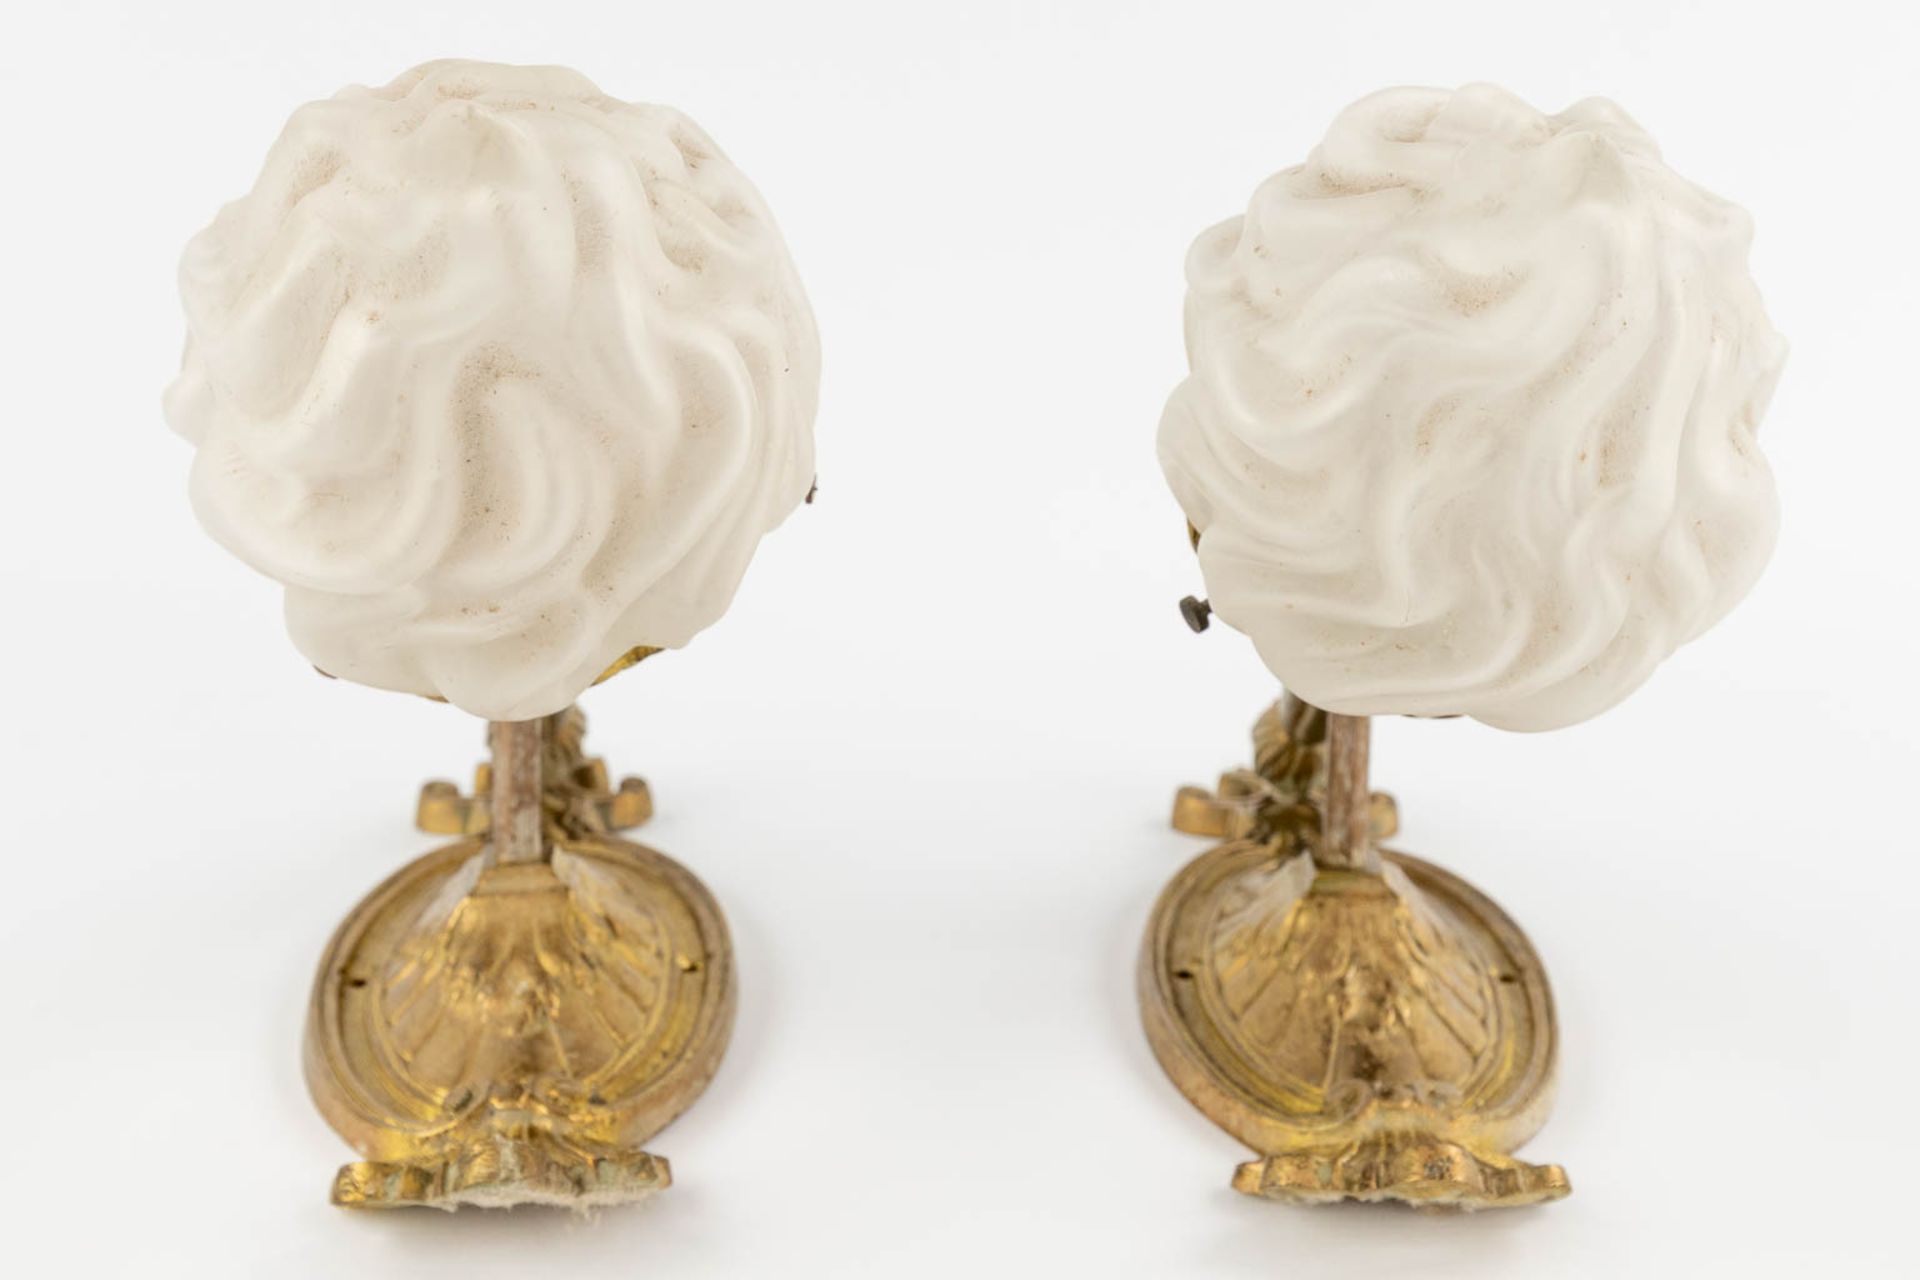 A pair of wall-mounted gilt bronze torches with a glass shade. Circa 1920. (D:21 x W:9 x H:39 cm) - Image 4 of 13